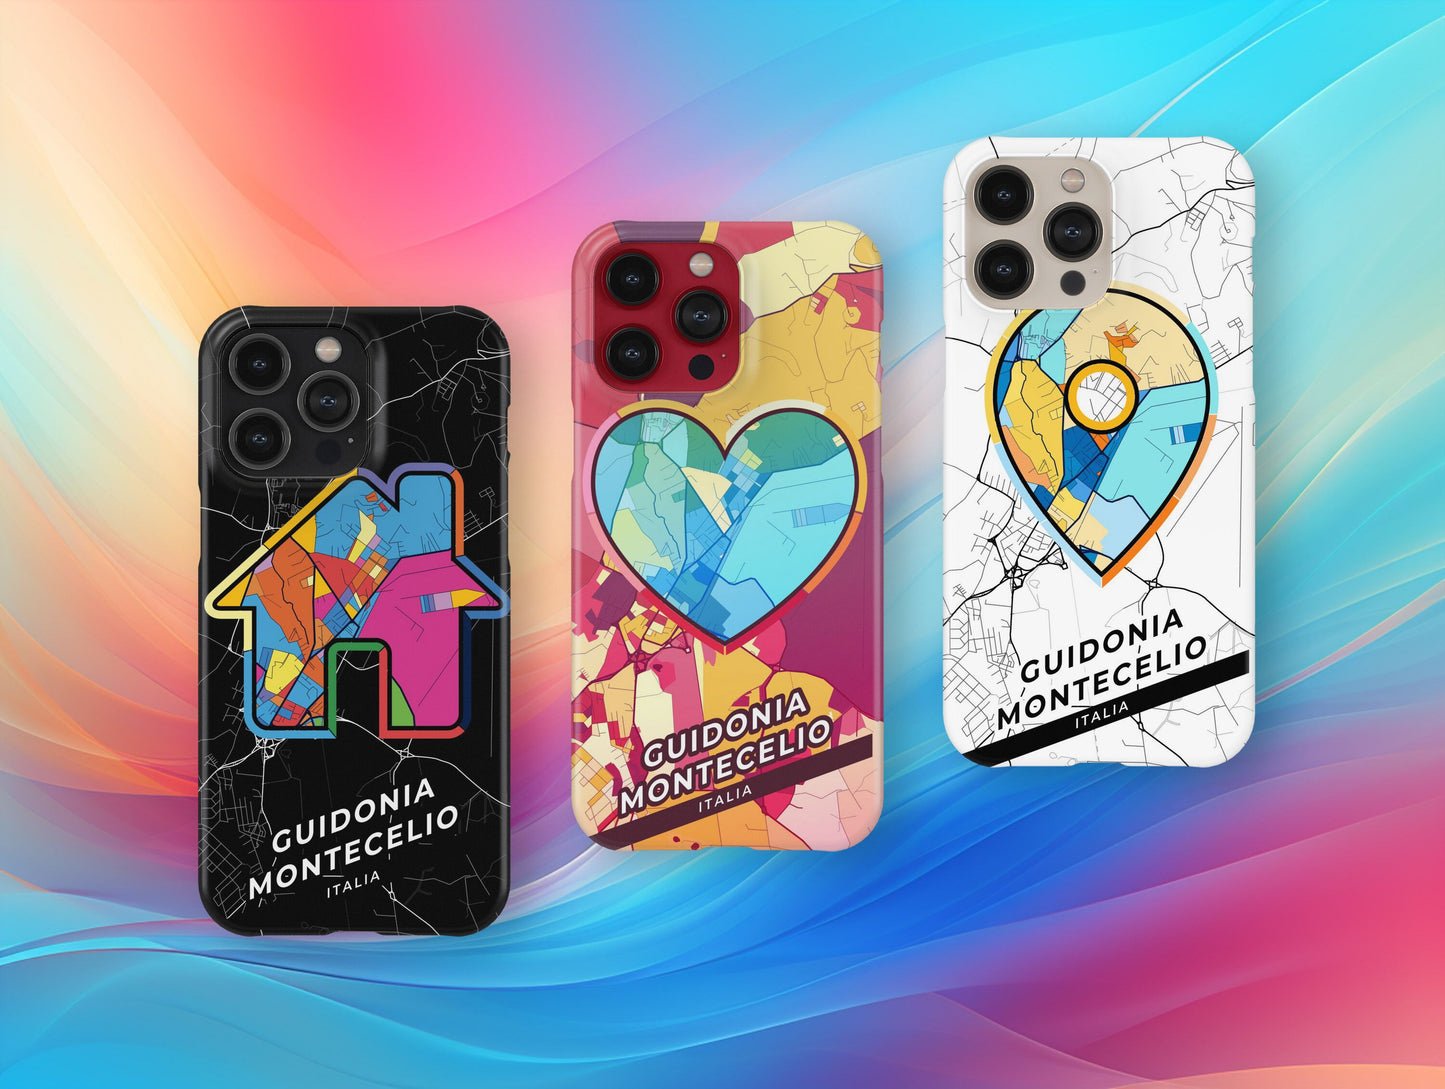 Guidonia Montecelio Italy slim phone case with colorful icon. Birthday, wedding or housewarming gift. Couple match cases.